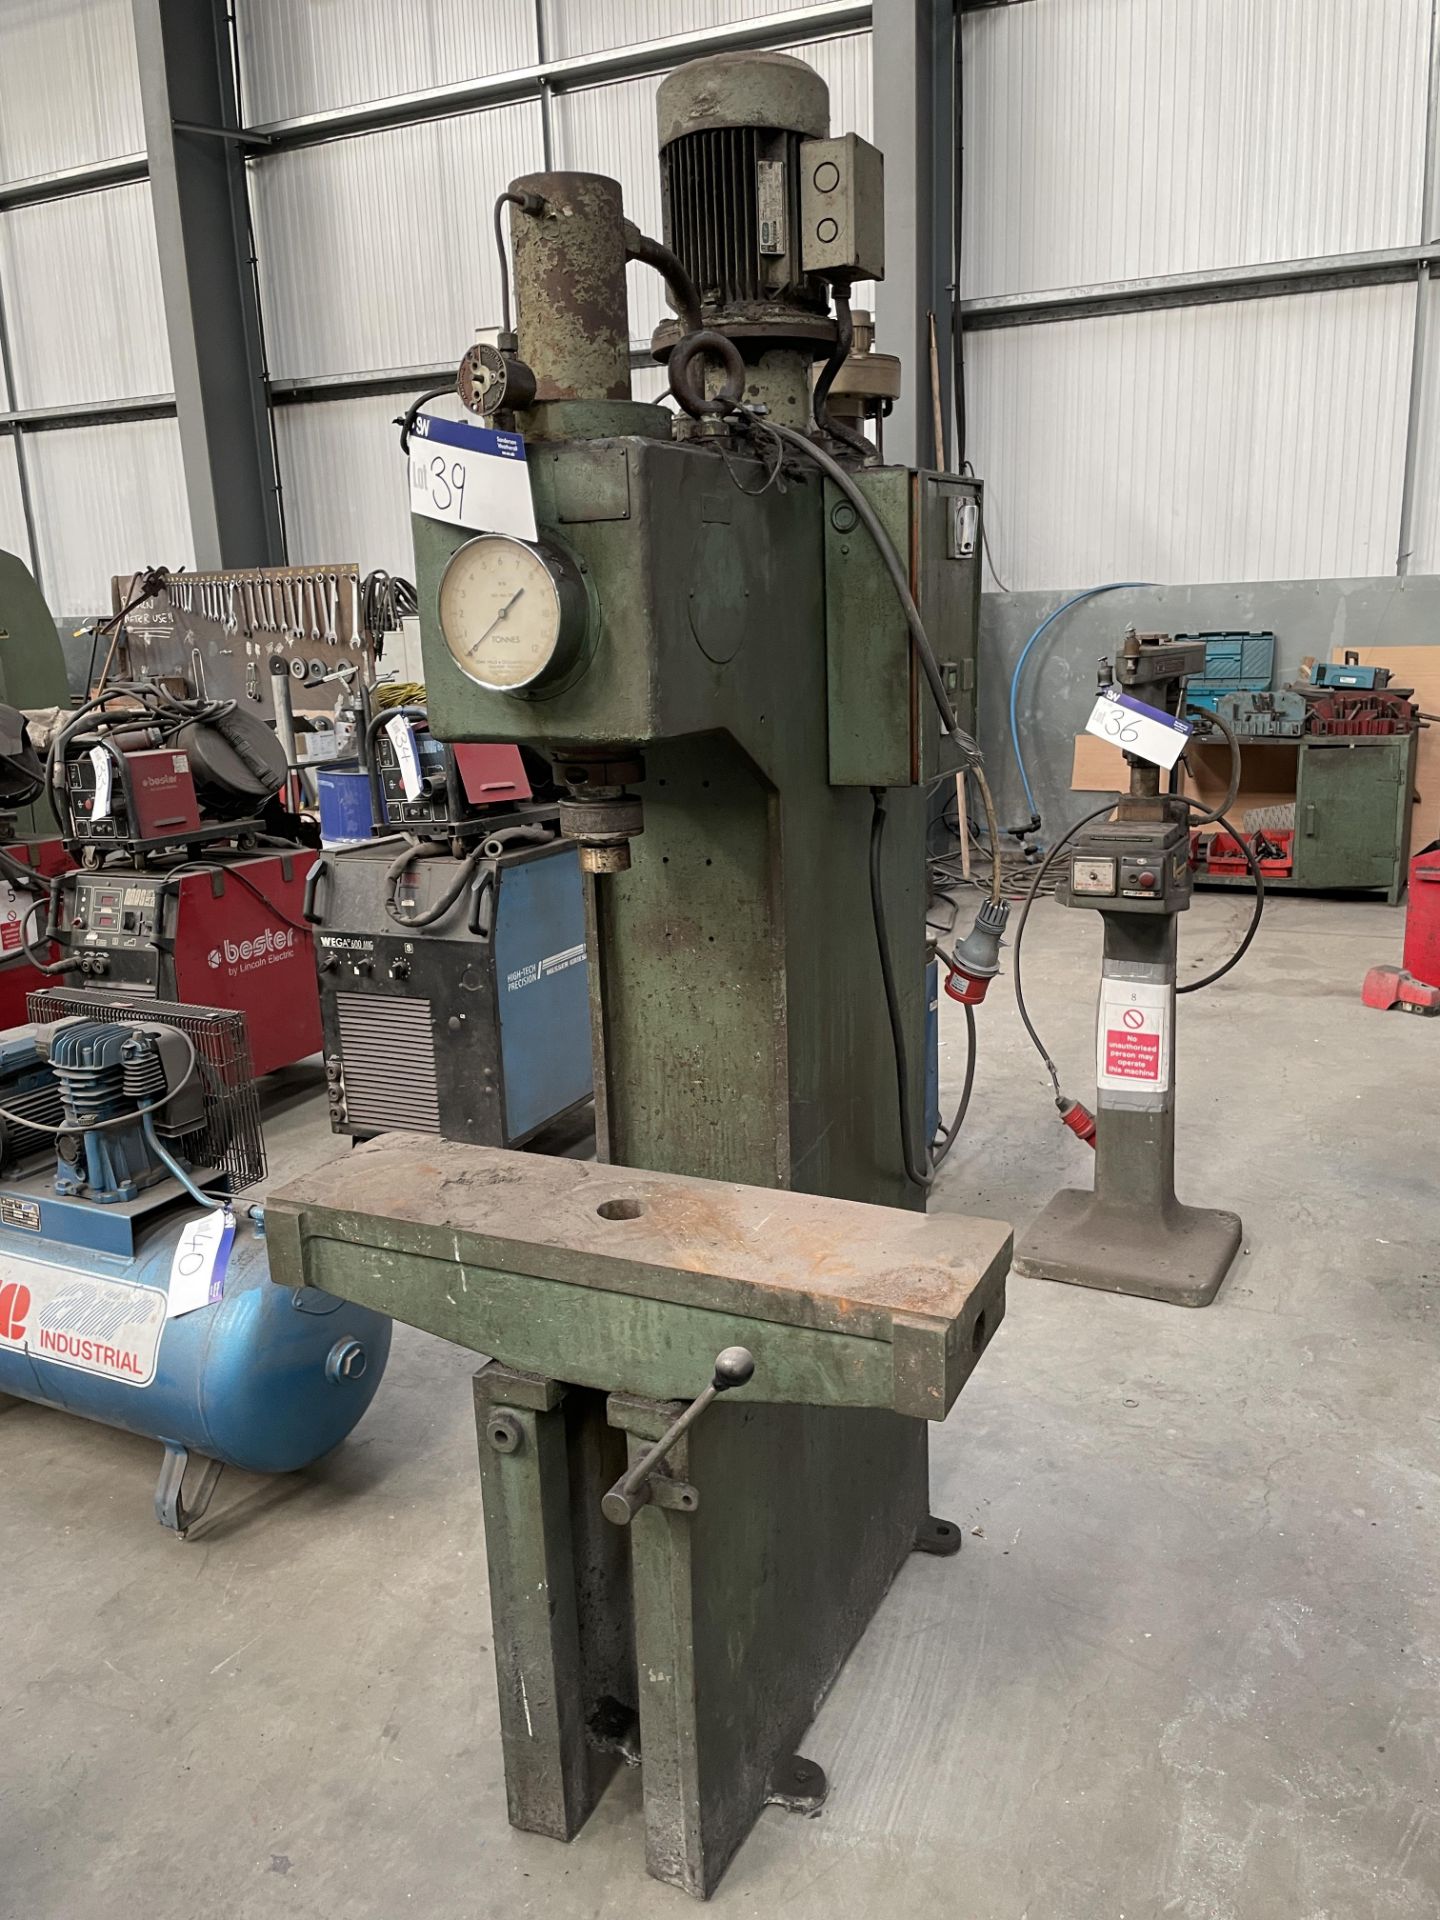 Mills Hydraulic Press, serial no. 52071, with table approx. 910mm x 250mm, lot located at Ocean